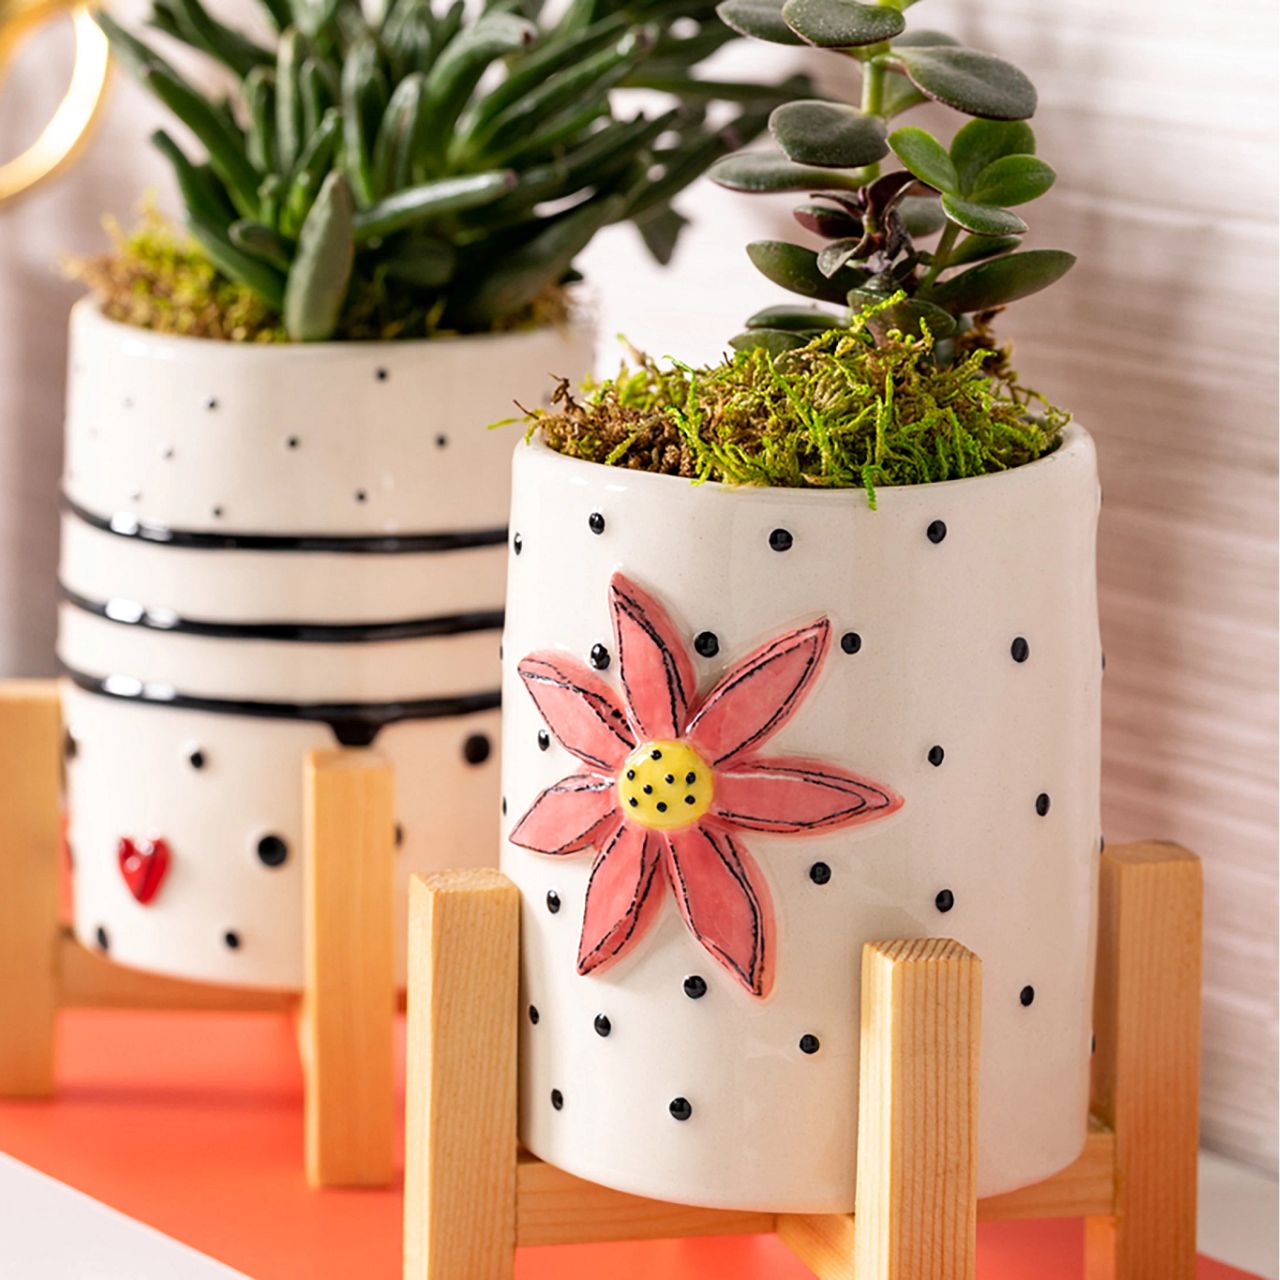 Tracy Pesche's Flower Mini Planter  Add a whimsical, happy touch to your home with Tracy Pesche's uplifting ceramic art. Her hand-painted Flower Mini Planter is a white planter with black polka dots and a bold pink Flower. The light wood base makes the planter sturdy and perfect for many decorating styles.